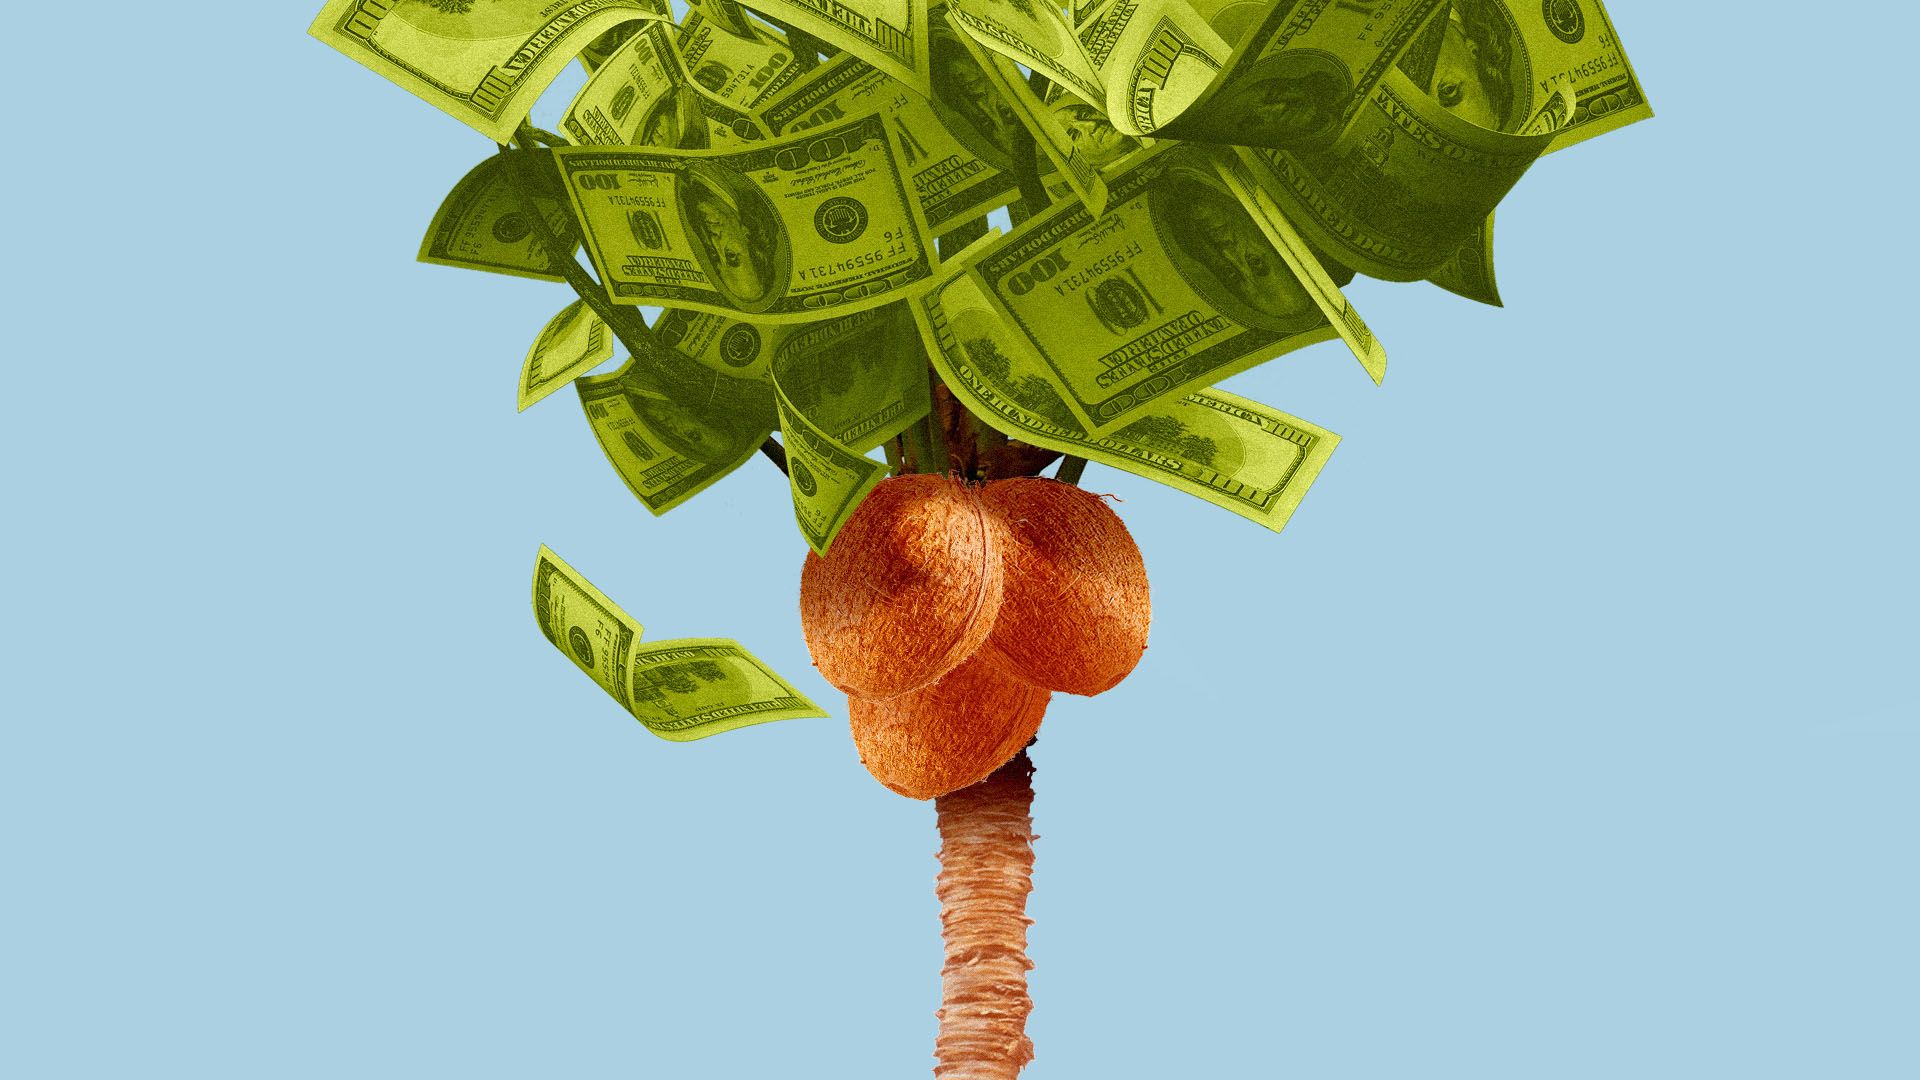 Illustration of a coconut tree with money for the leaves.